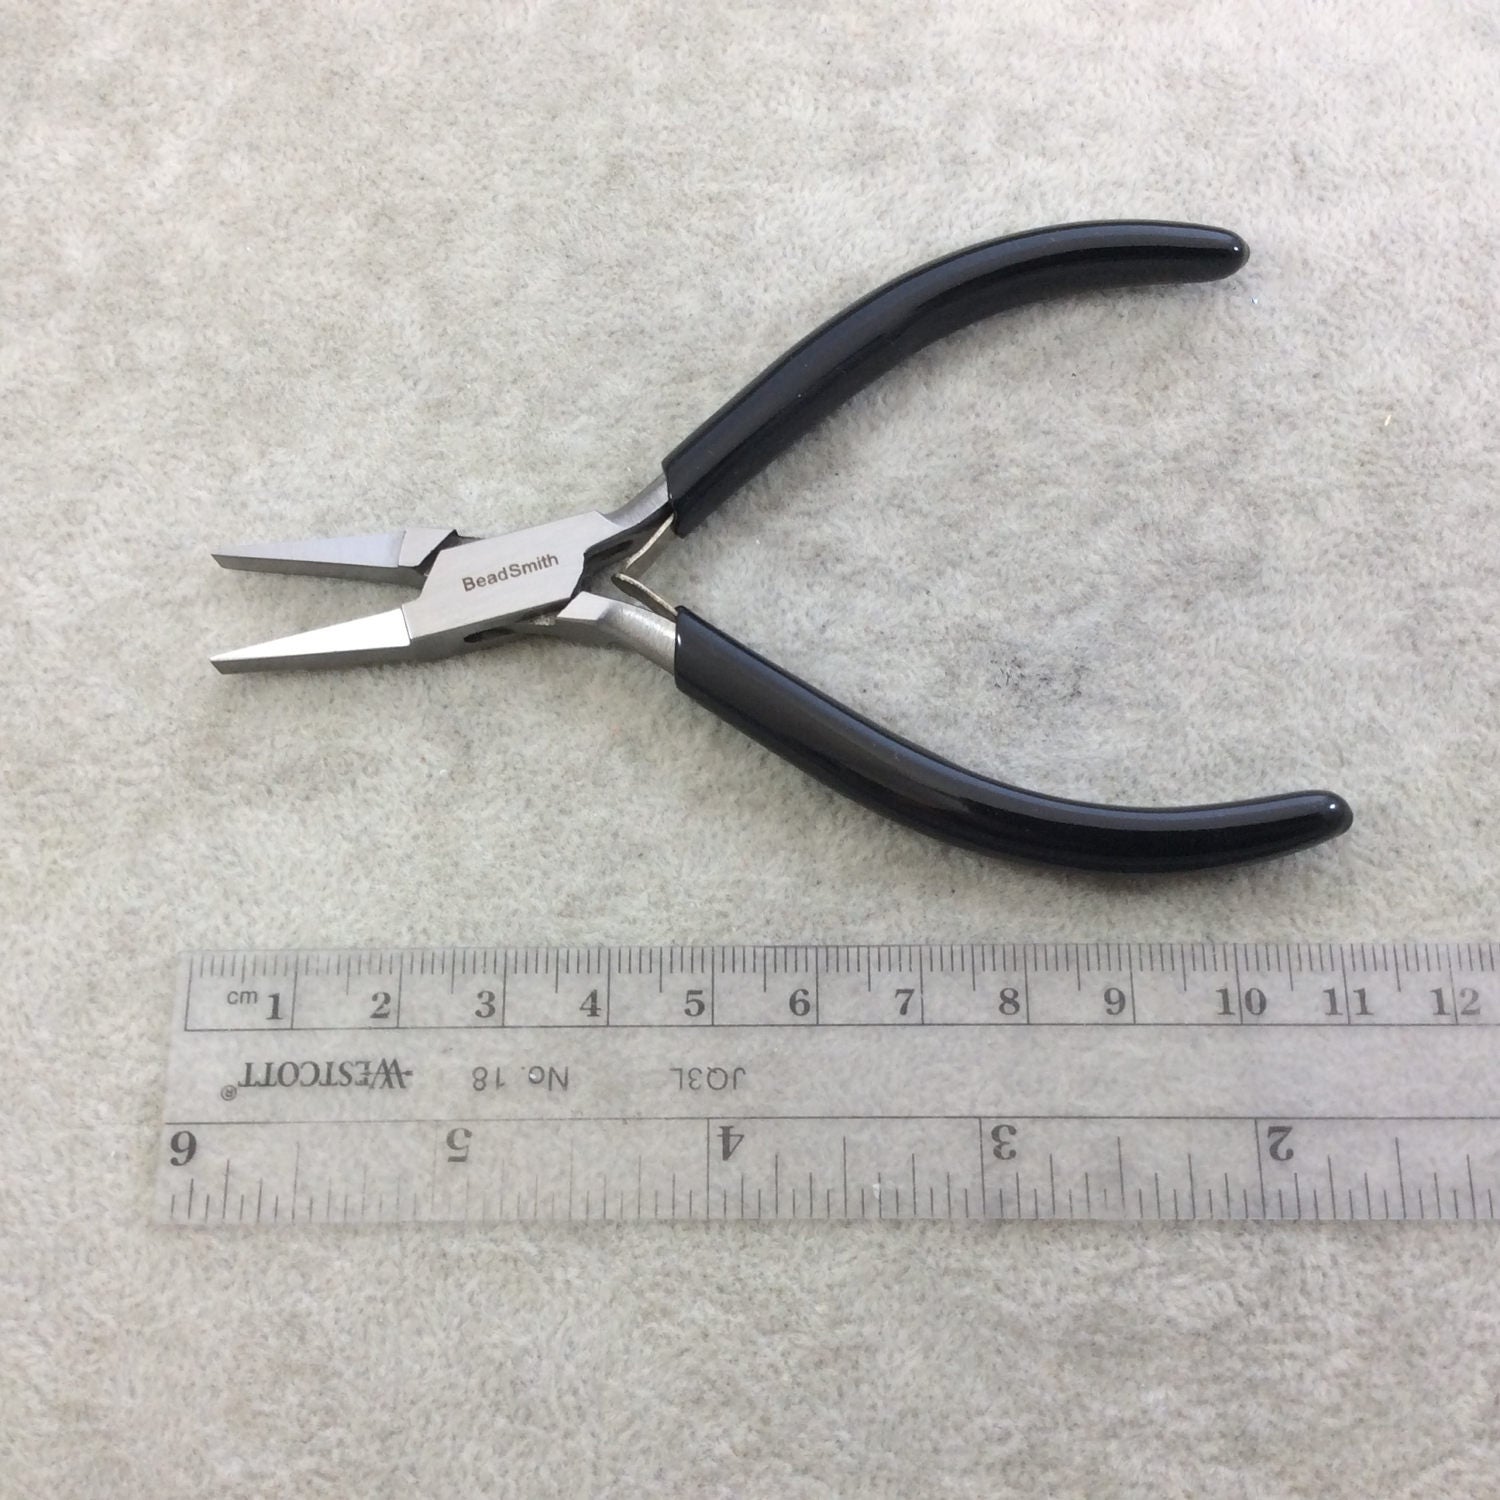 Jewelry Pliers Long Chain Nose Pliers Needle Nose Pliers Polishing